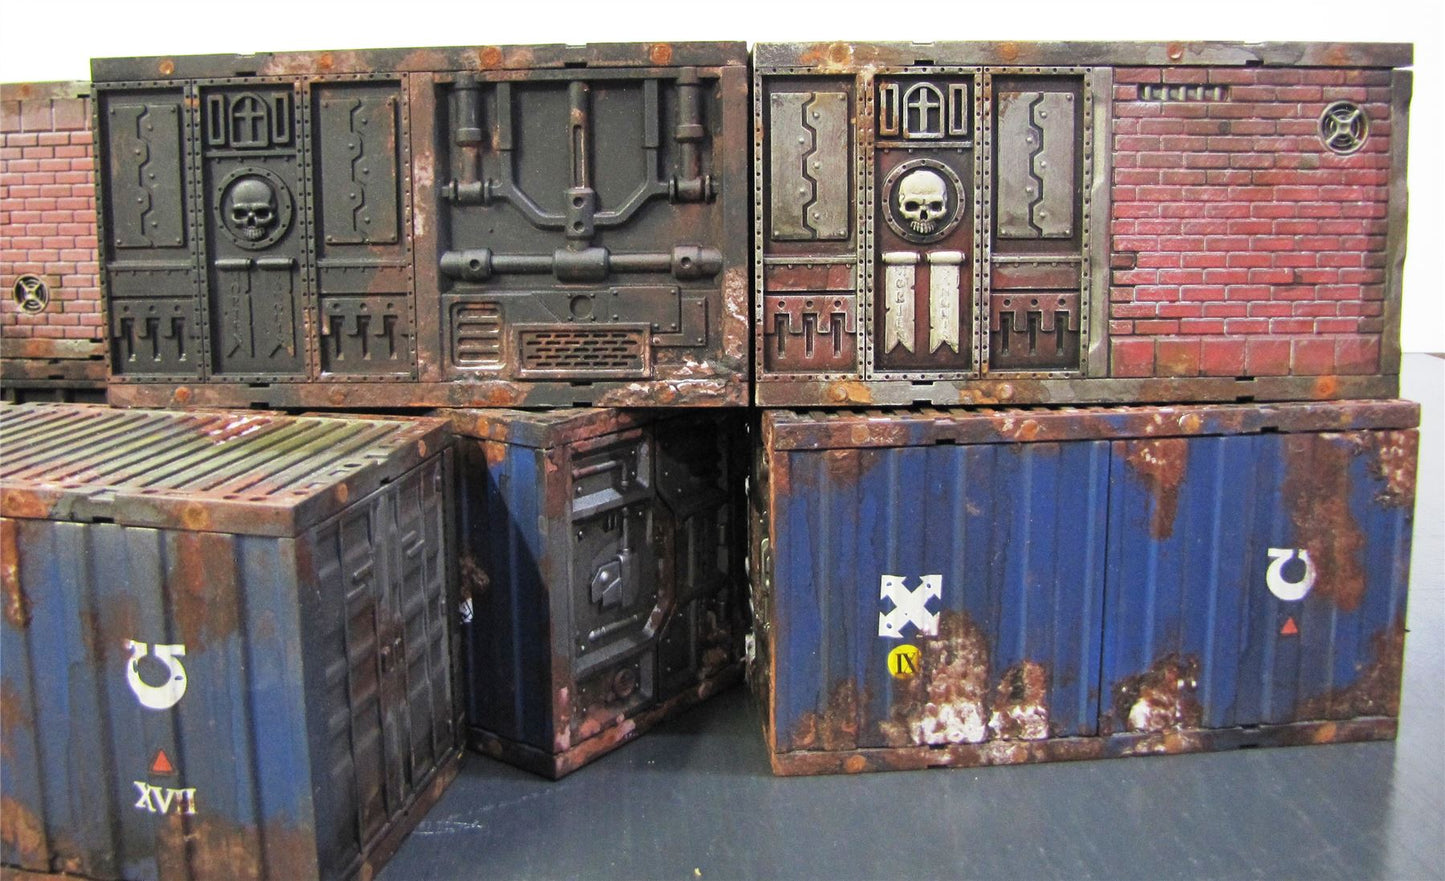 Crates - Magnetised And Painted - Terrain - Warhammer AoS 40k #1H7